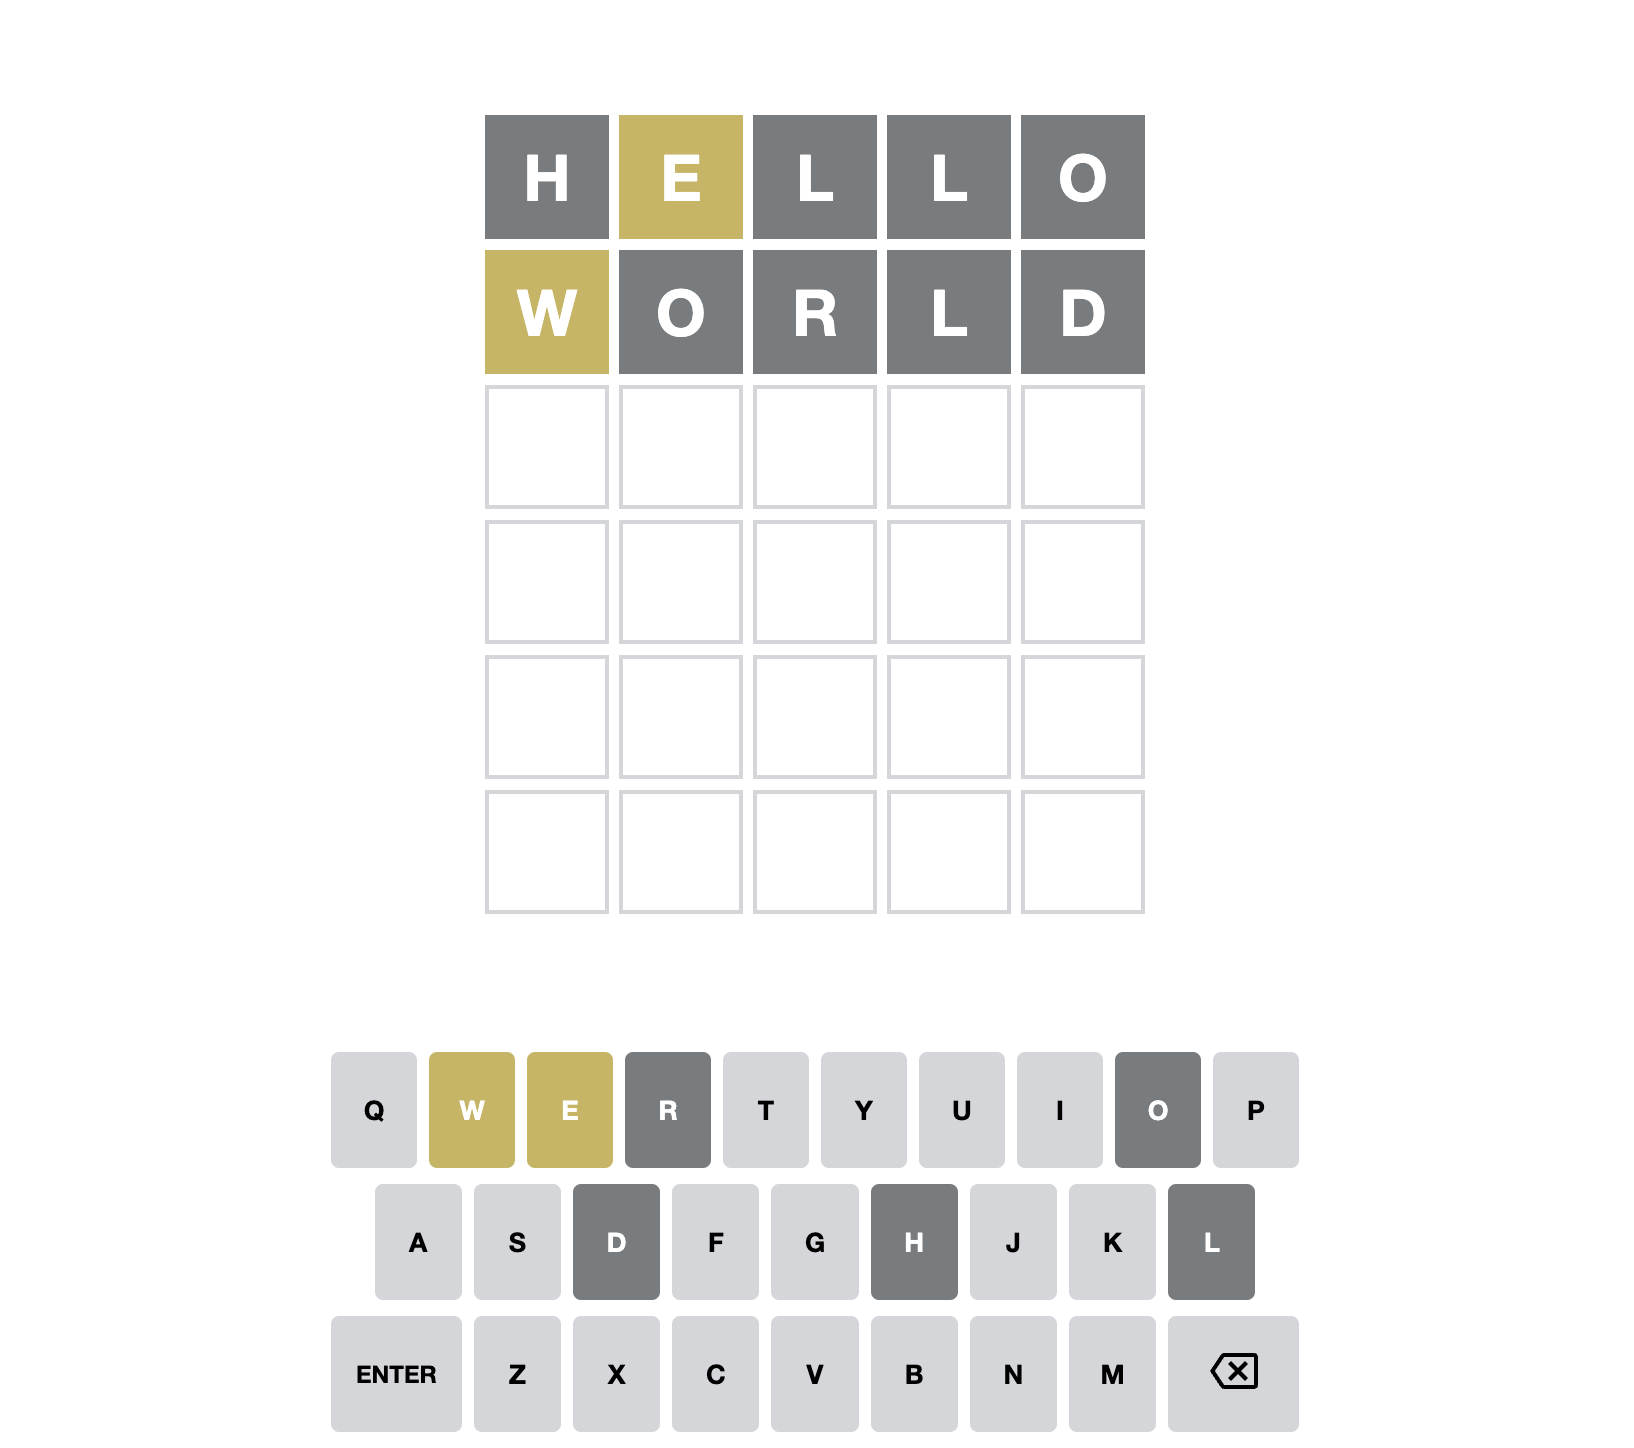 Screenshot of the Wordle game, showing a keyboard below the game board